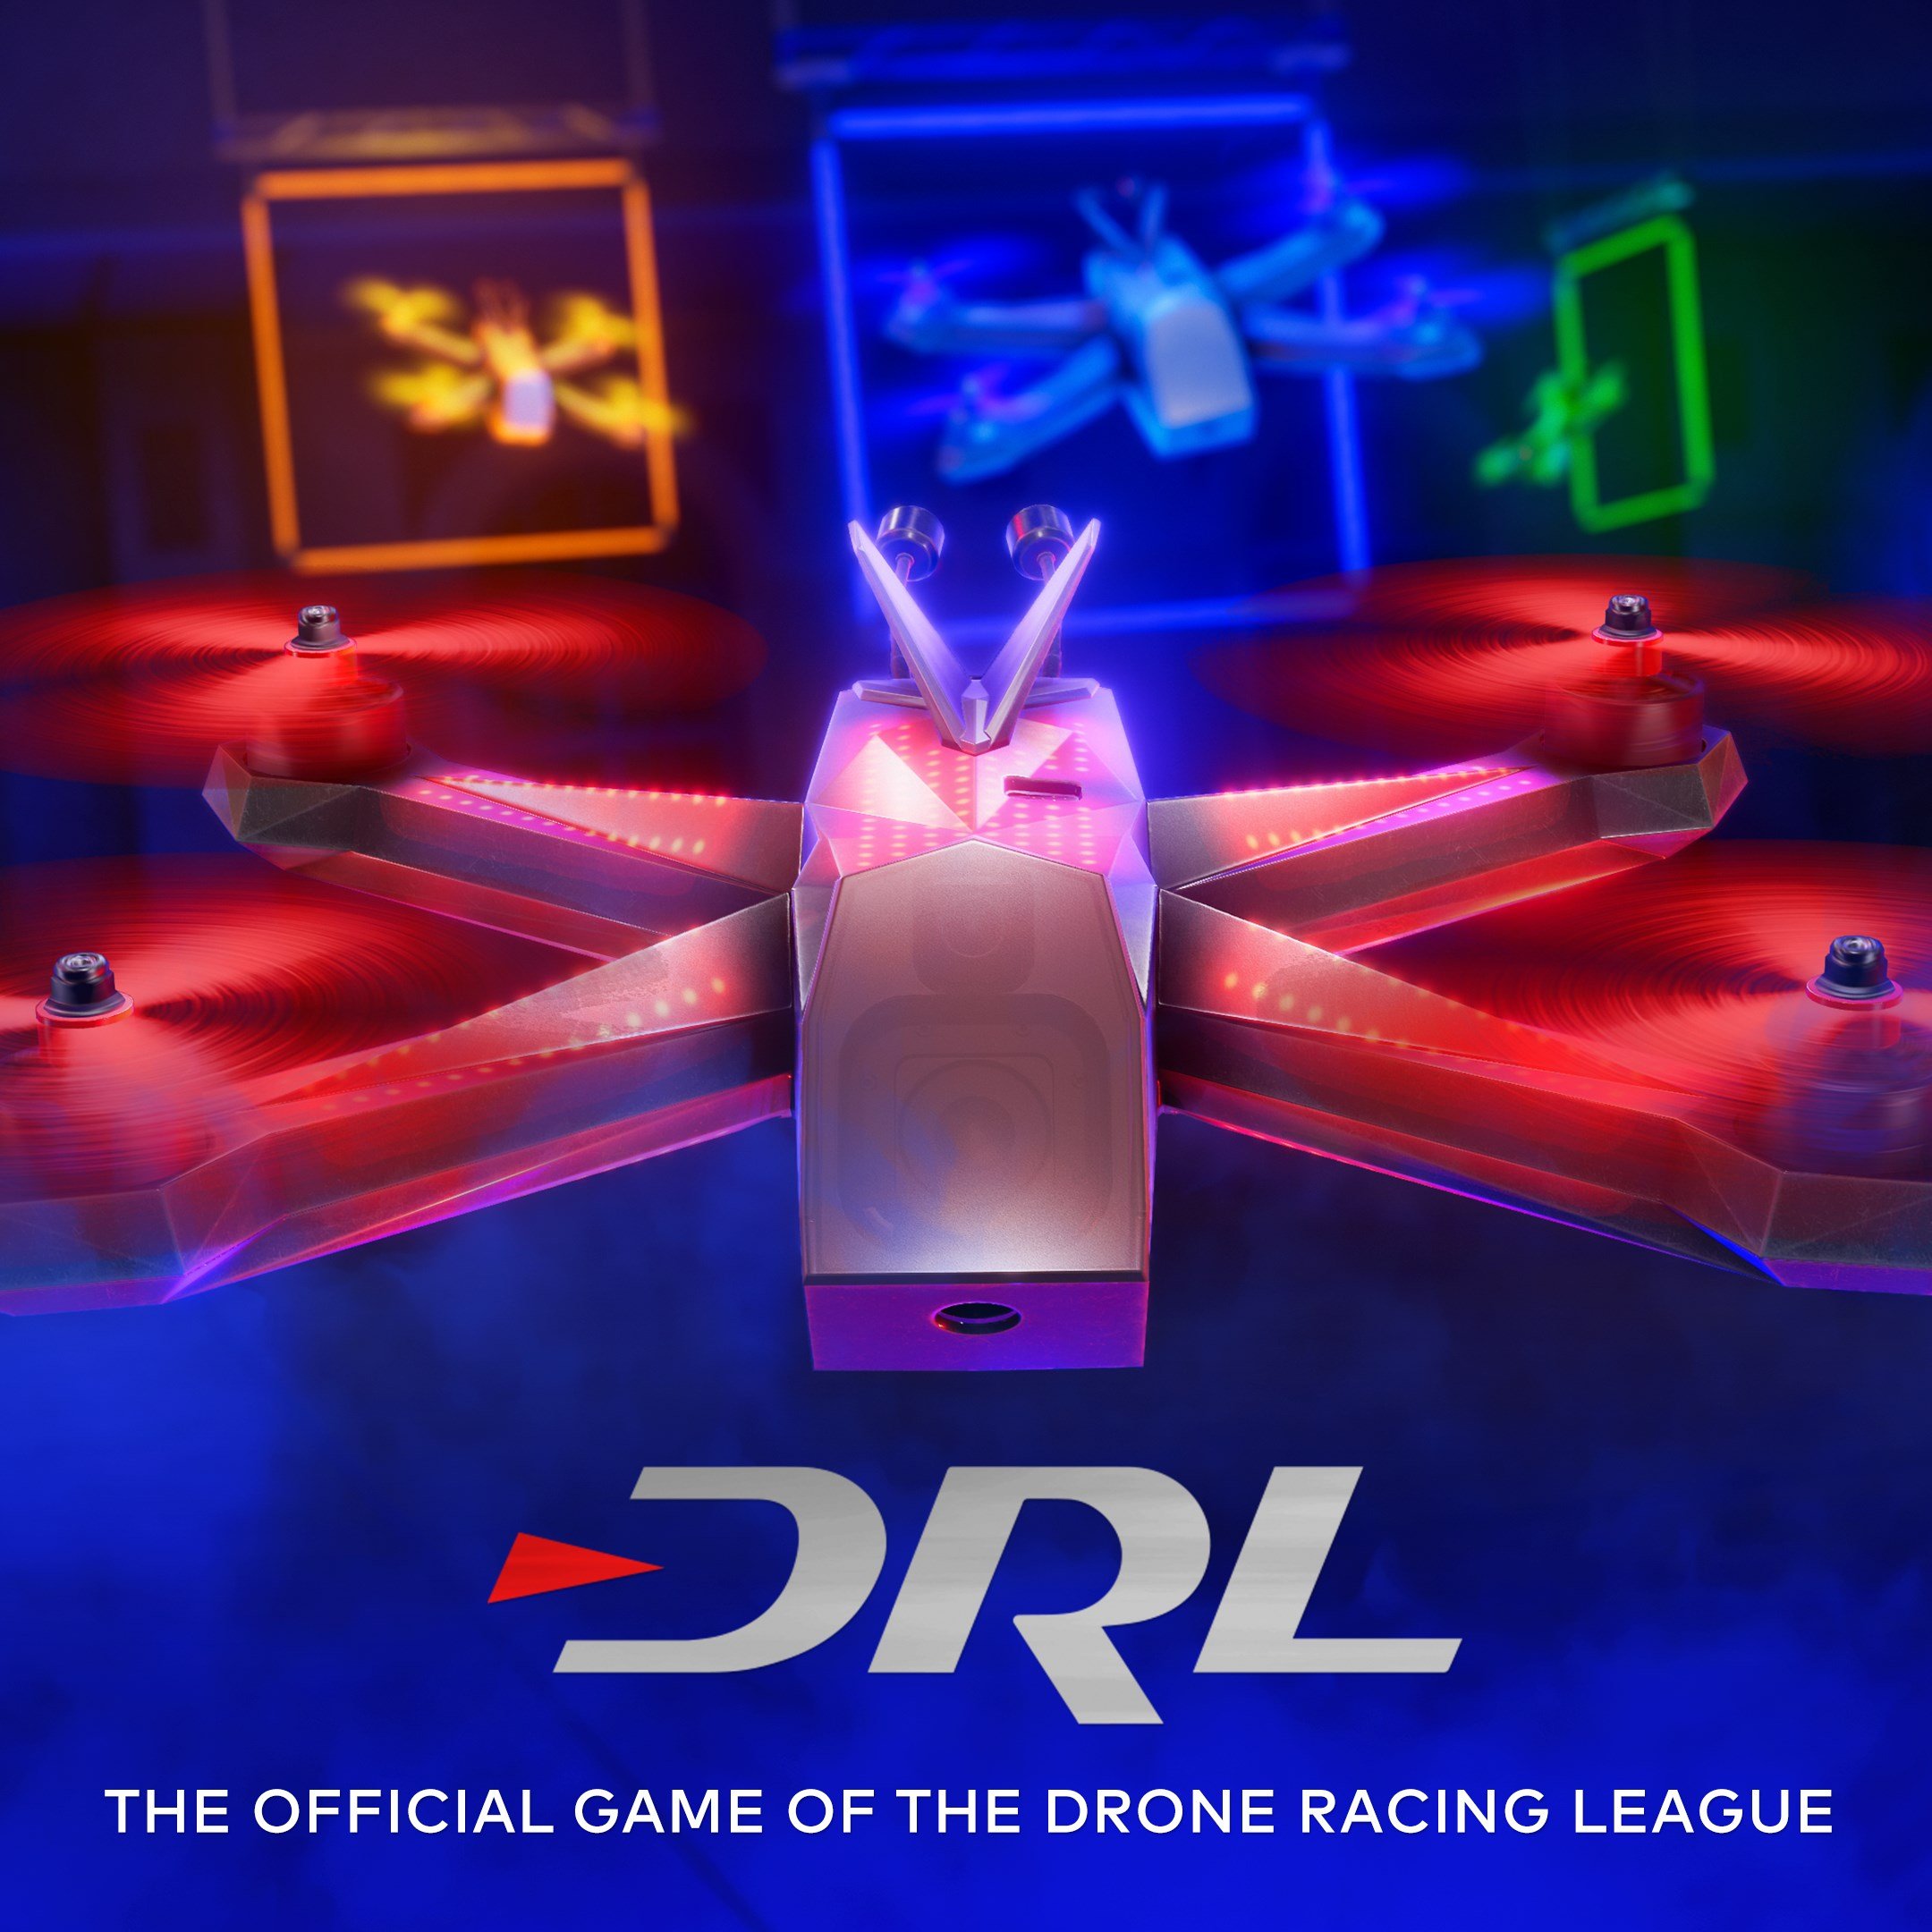 Boxart for The Drone Racing League Simulator